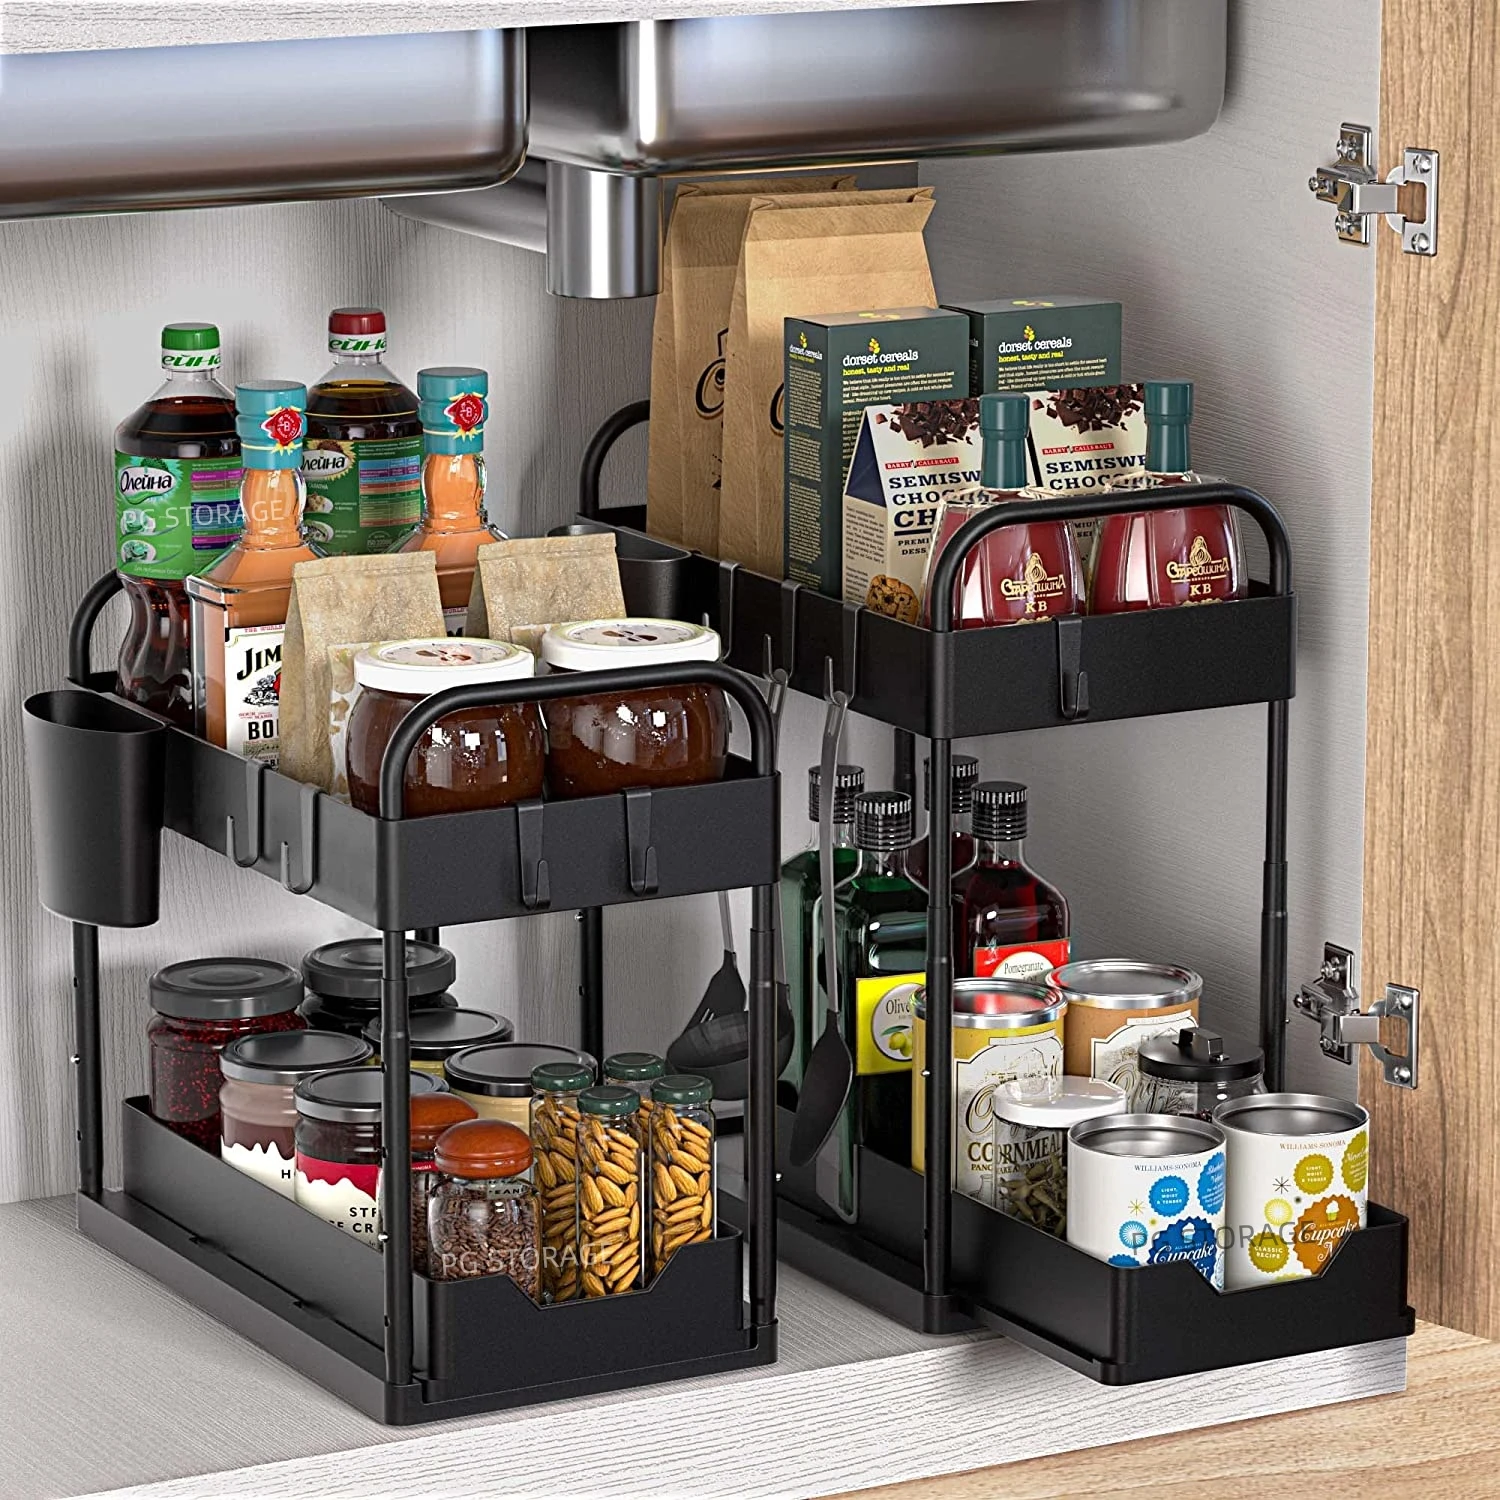 THE DWELLERY Under kitchen sink organizers and storage, 2 Pack under the  sink organizer with hooks & Hanging Cup, 2 Tier Large Capacity under sink